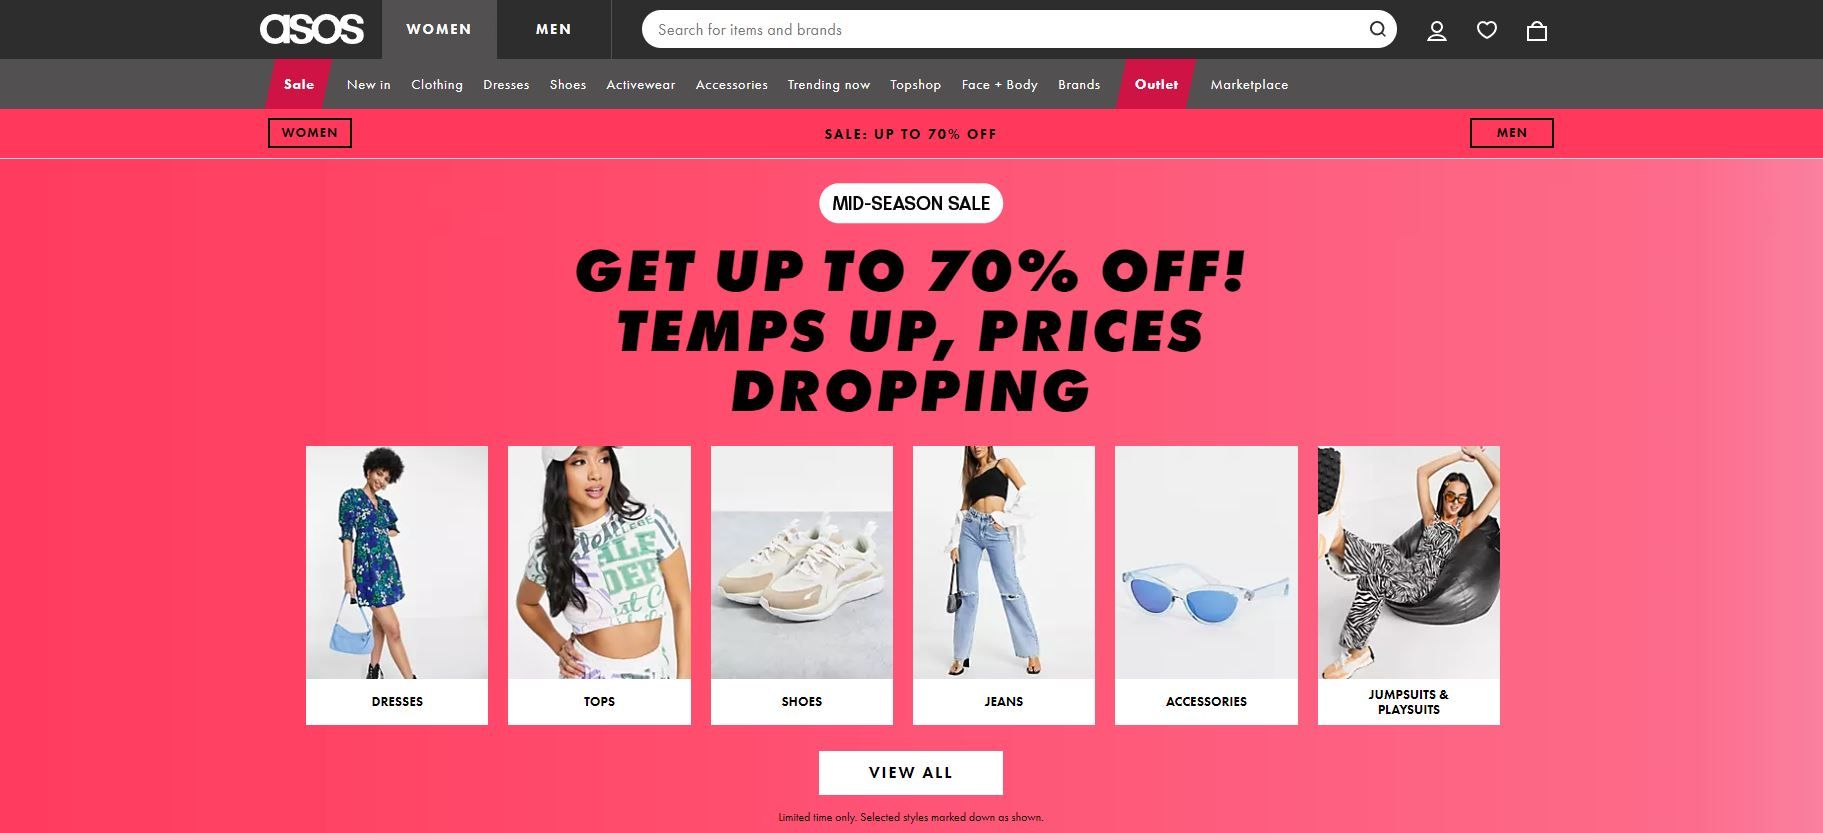 41+ Online Store & Websites Like SHEIN To Shop Cheap Trendy Clothes 